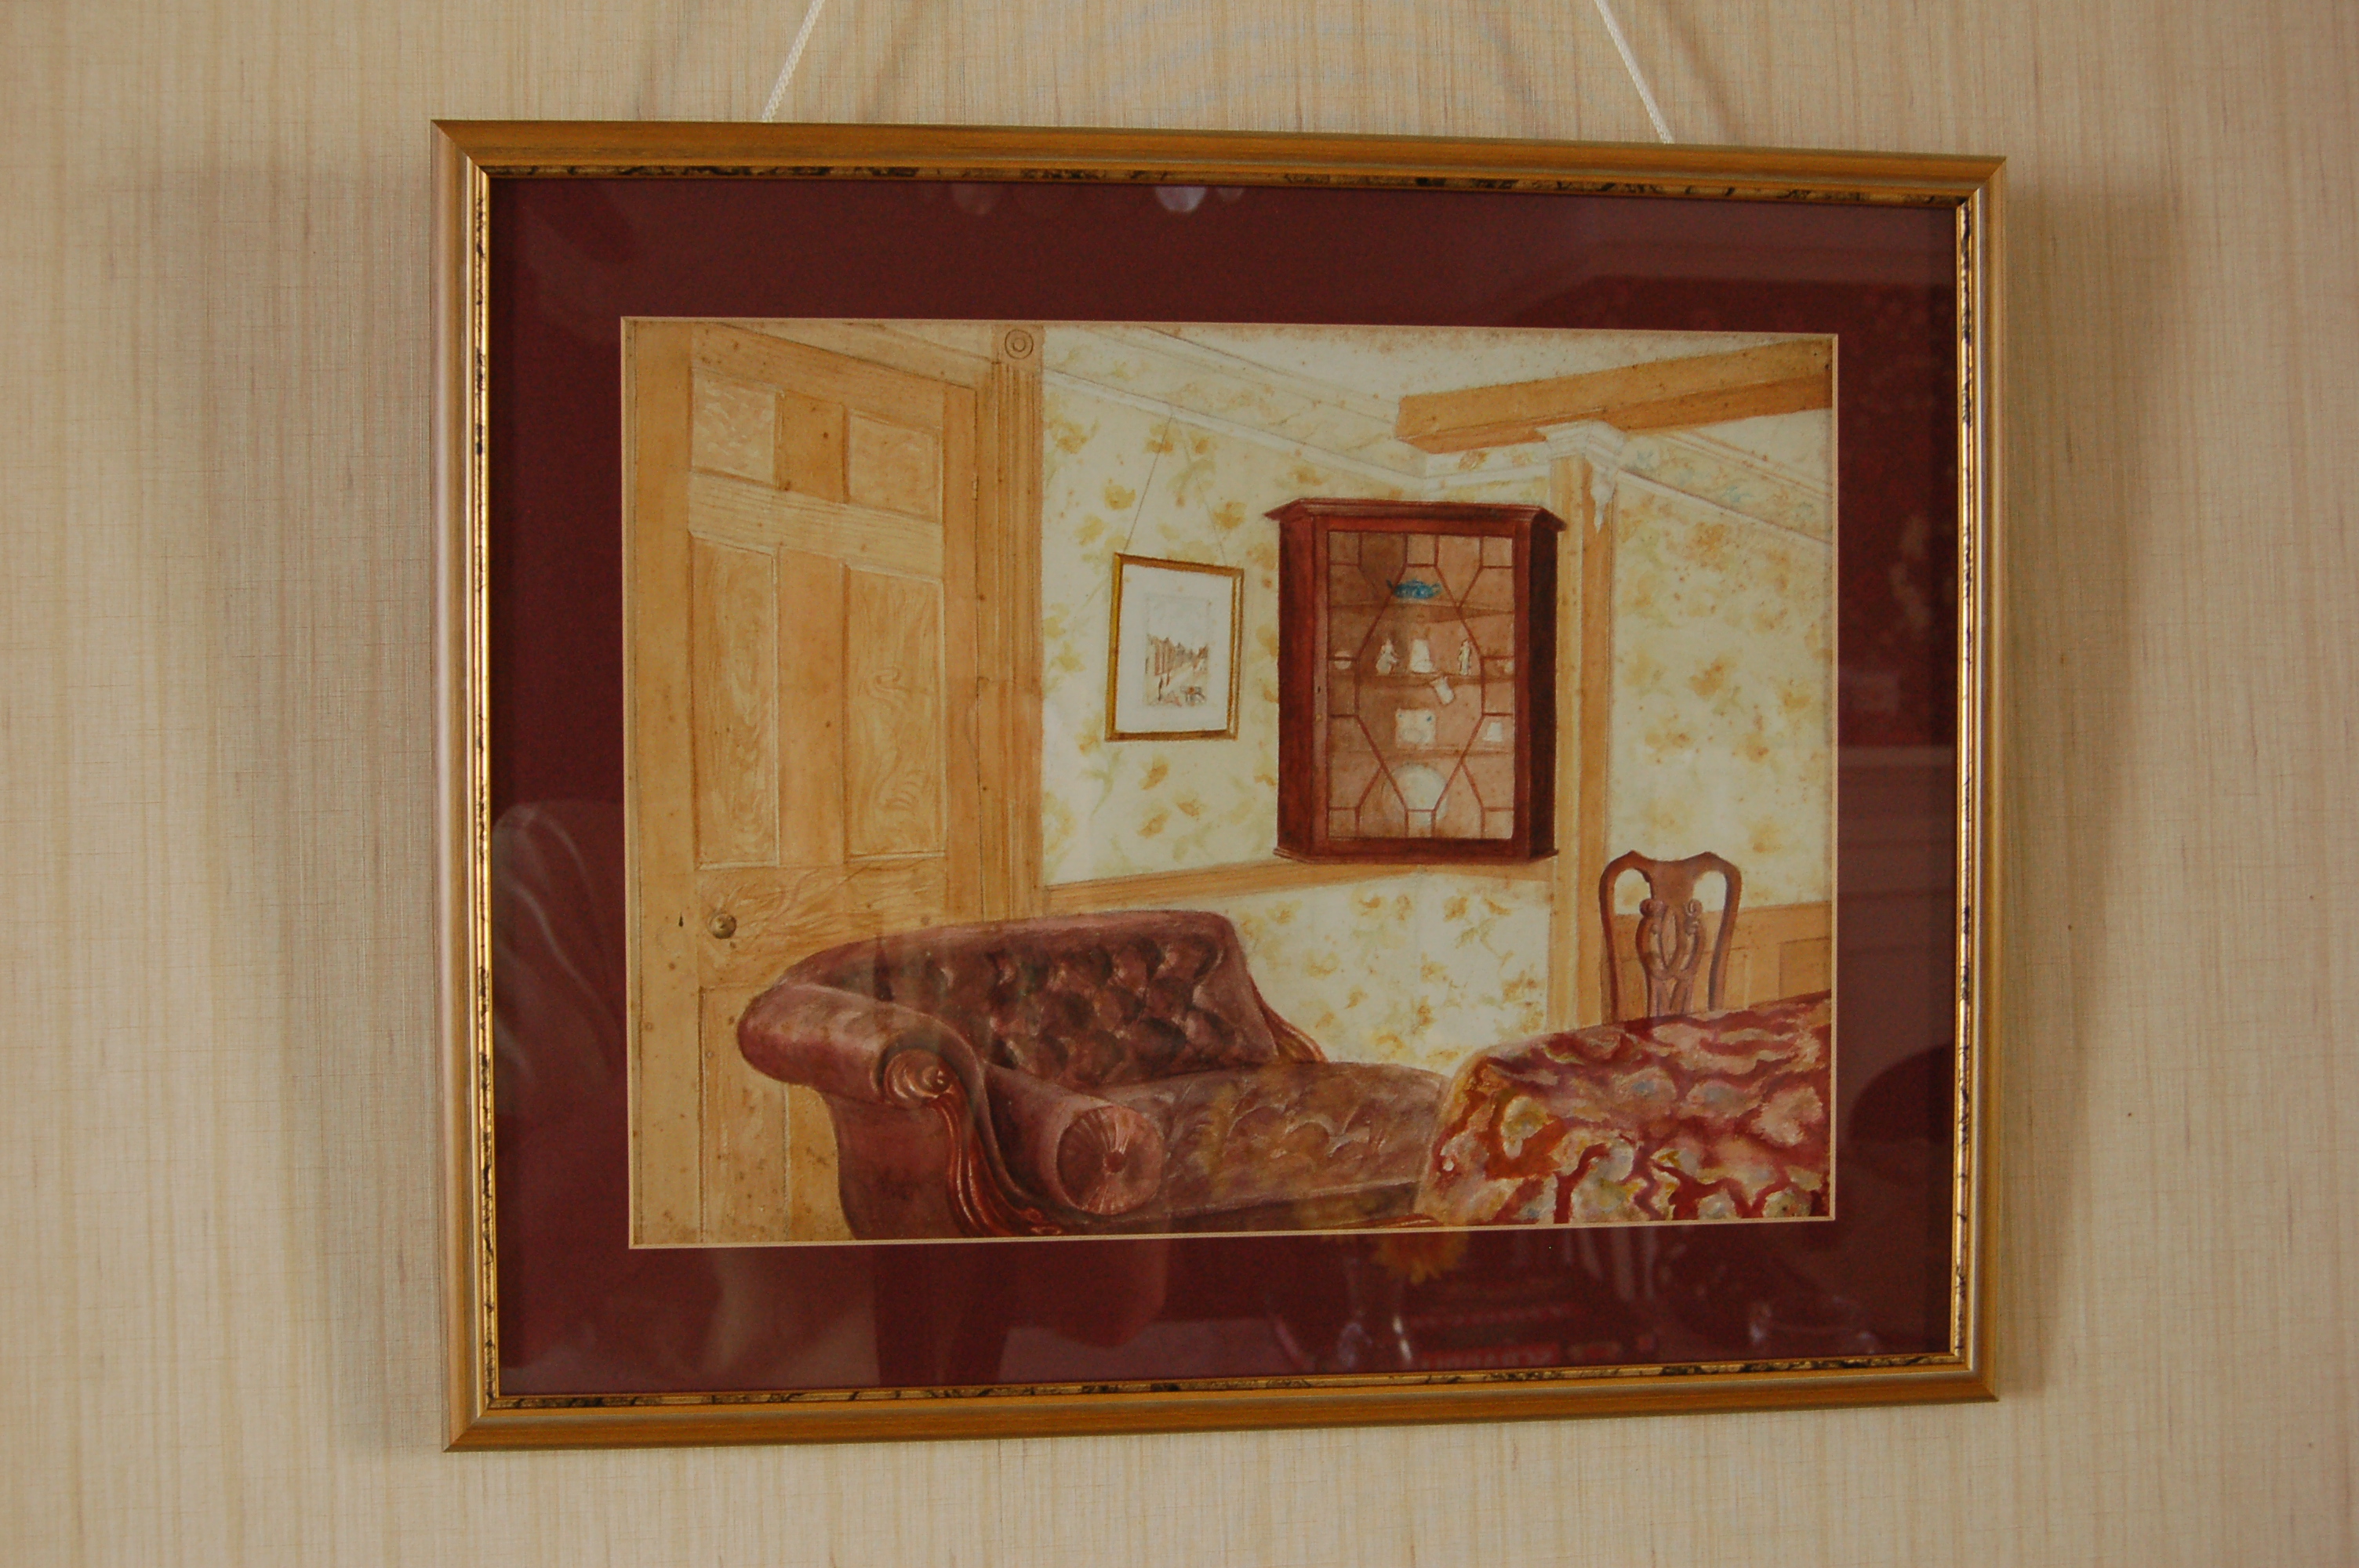 Picture by Elsie Nora Bearman hanging in Beachcrest in 2010, dated 1900 showing the interior of the front room there. The table and corner cabinet were sadly stolen not many years ago.